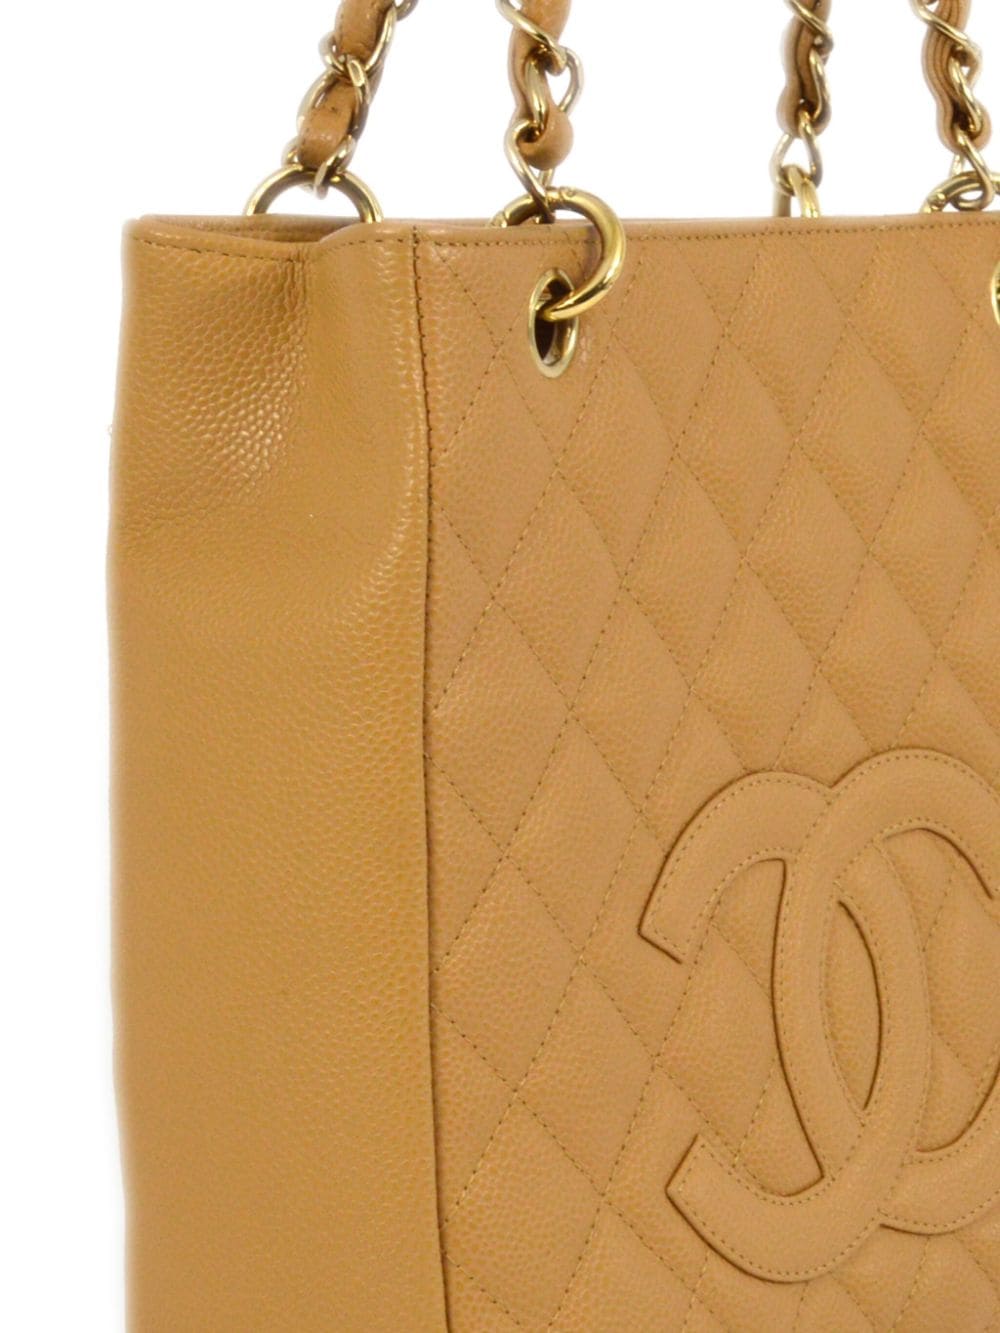 Pre-owned Chanel 2003 Petite Shopping Tote Bag In Neutrals